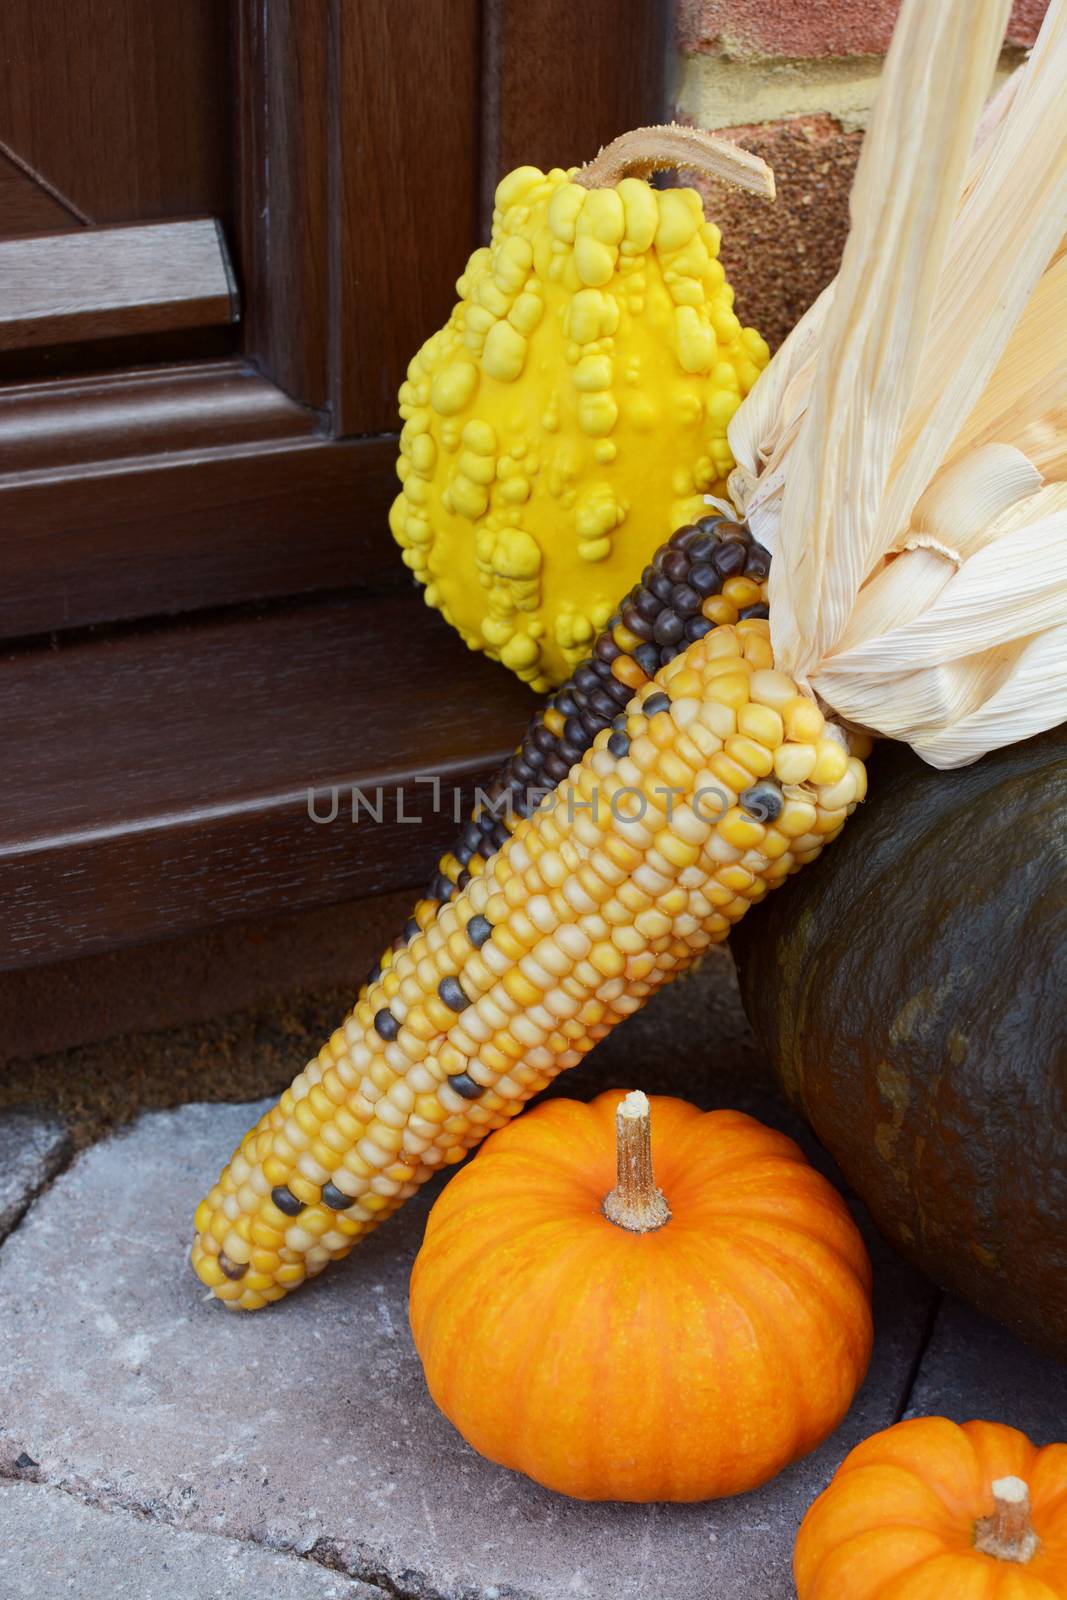 Ornamental sweetcorn and gourds as a Thanksgiving decoration on a doorstep